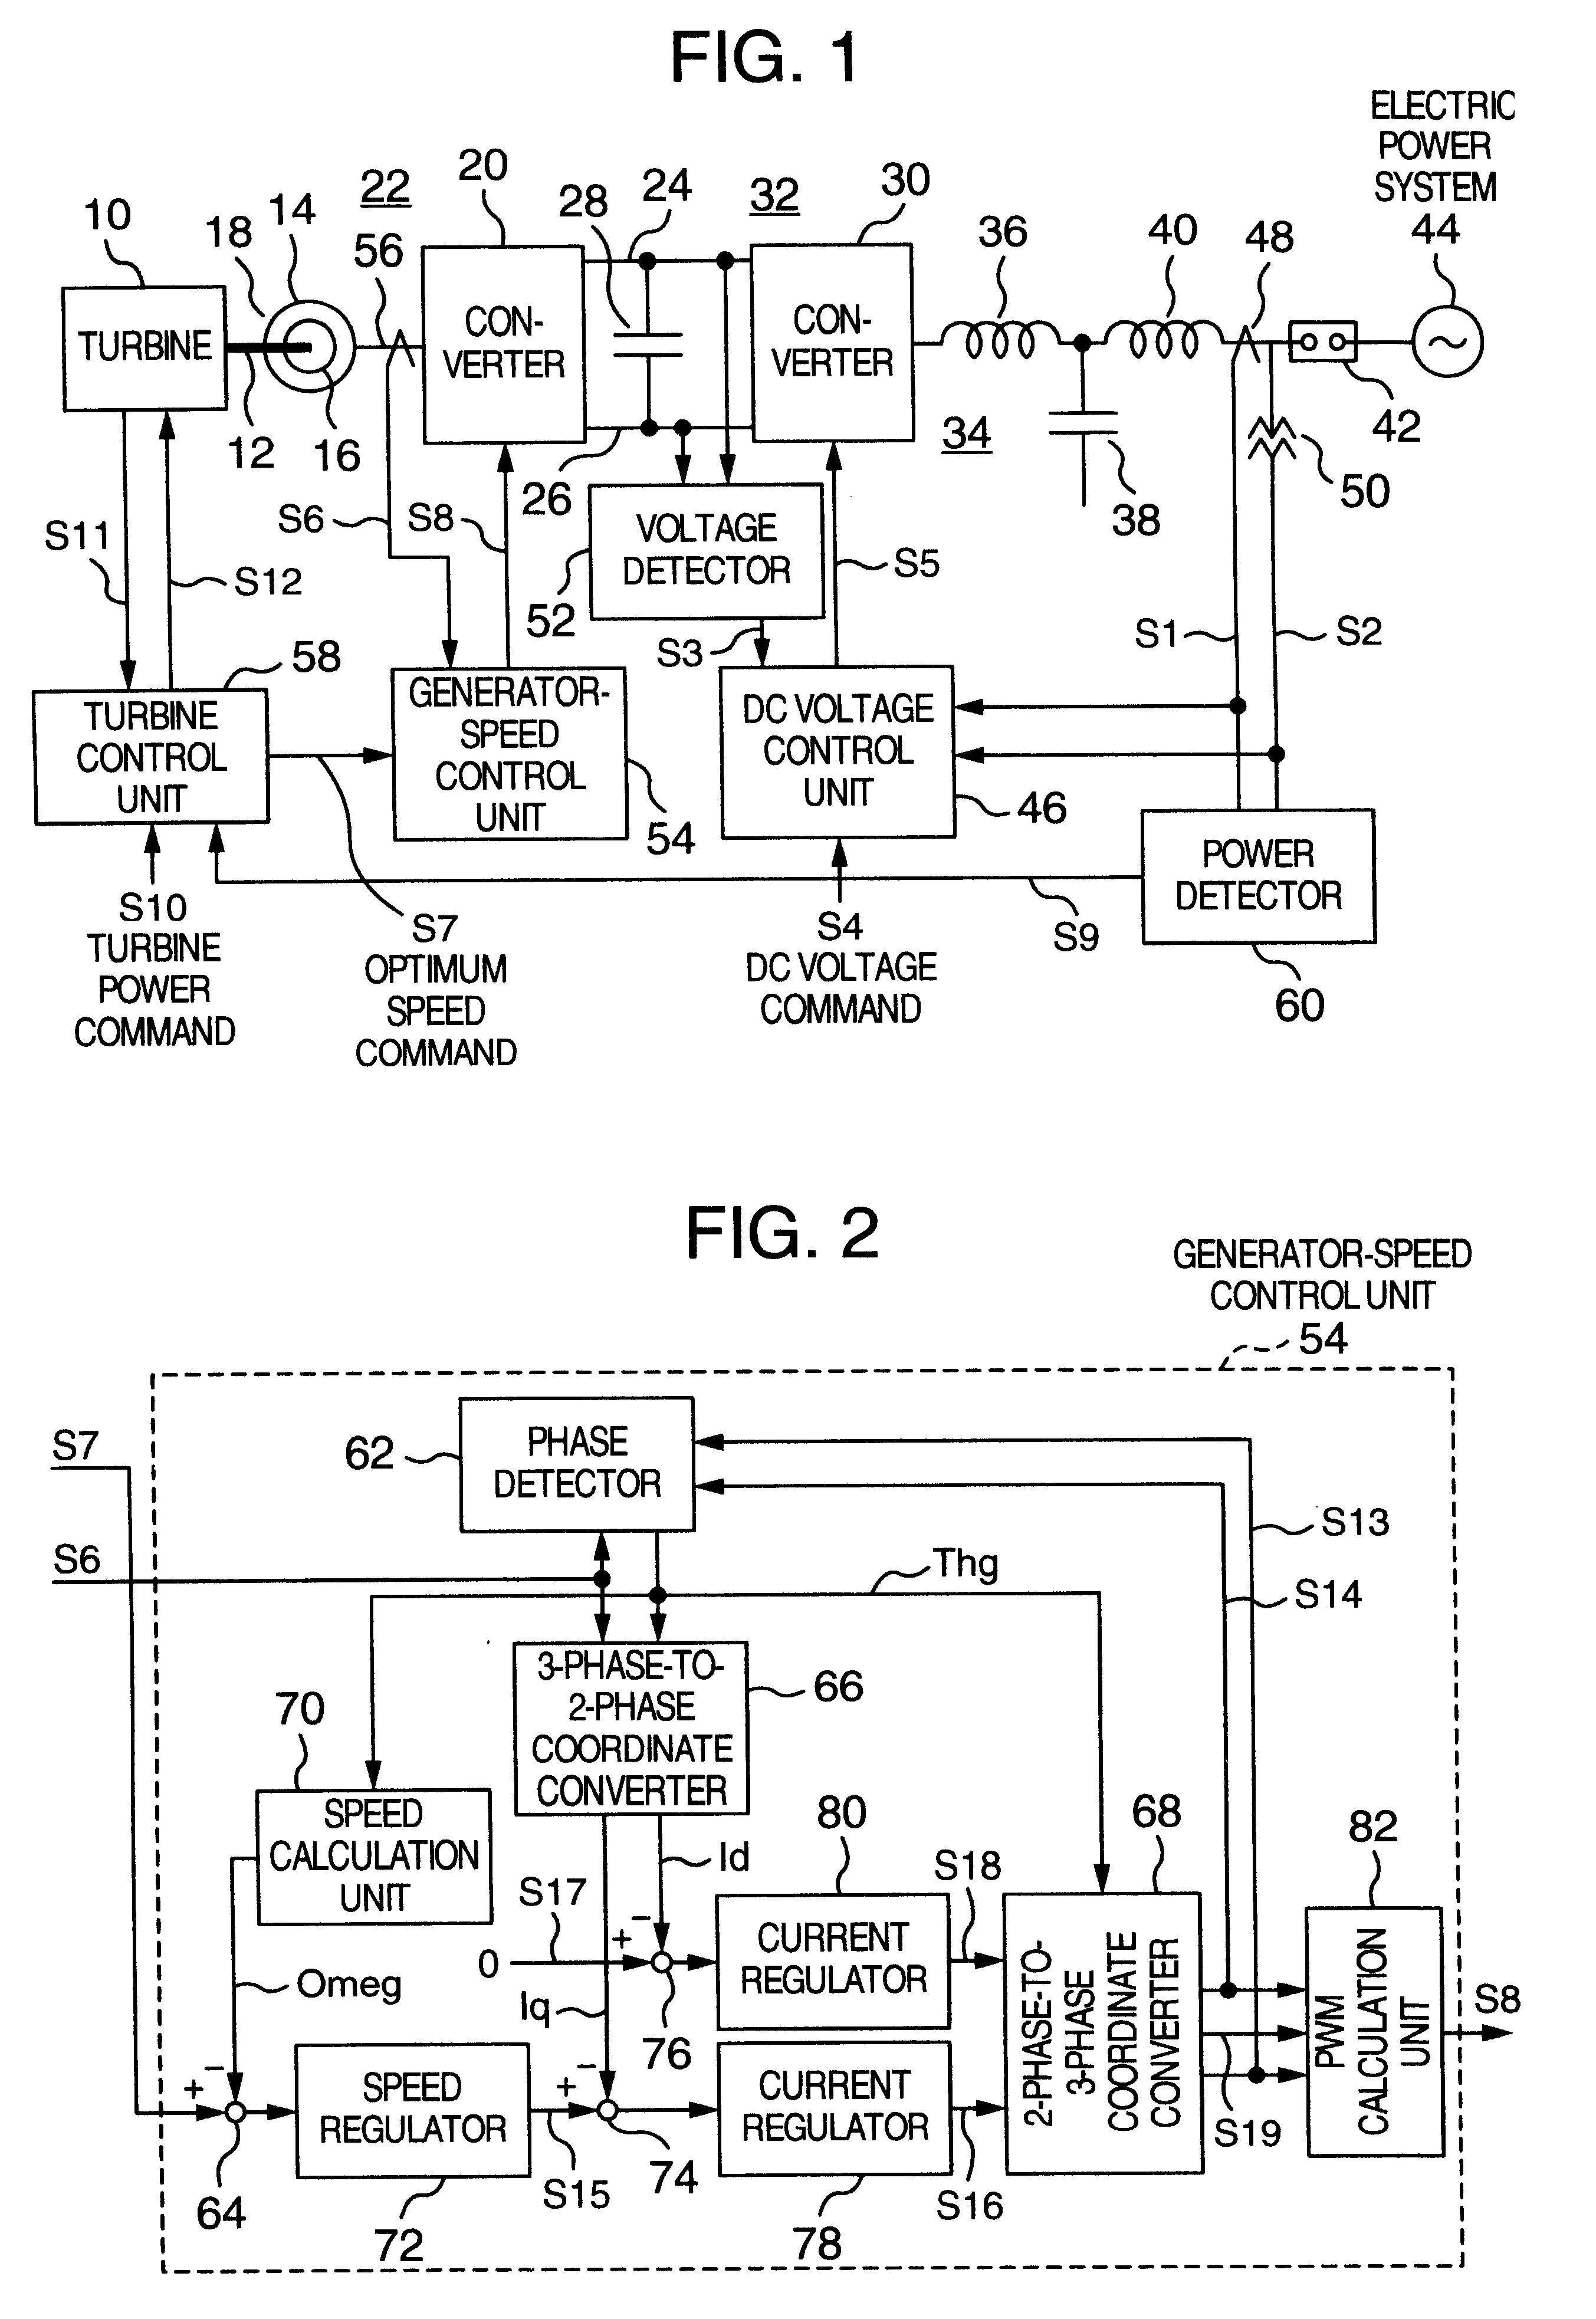 Combustion turbine power generation system and method of controlling the same